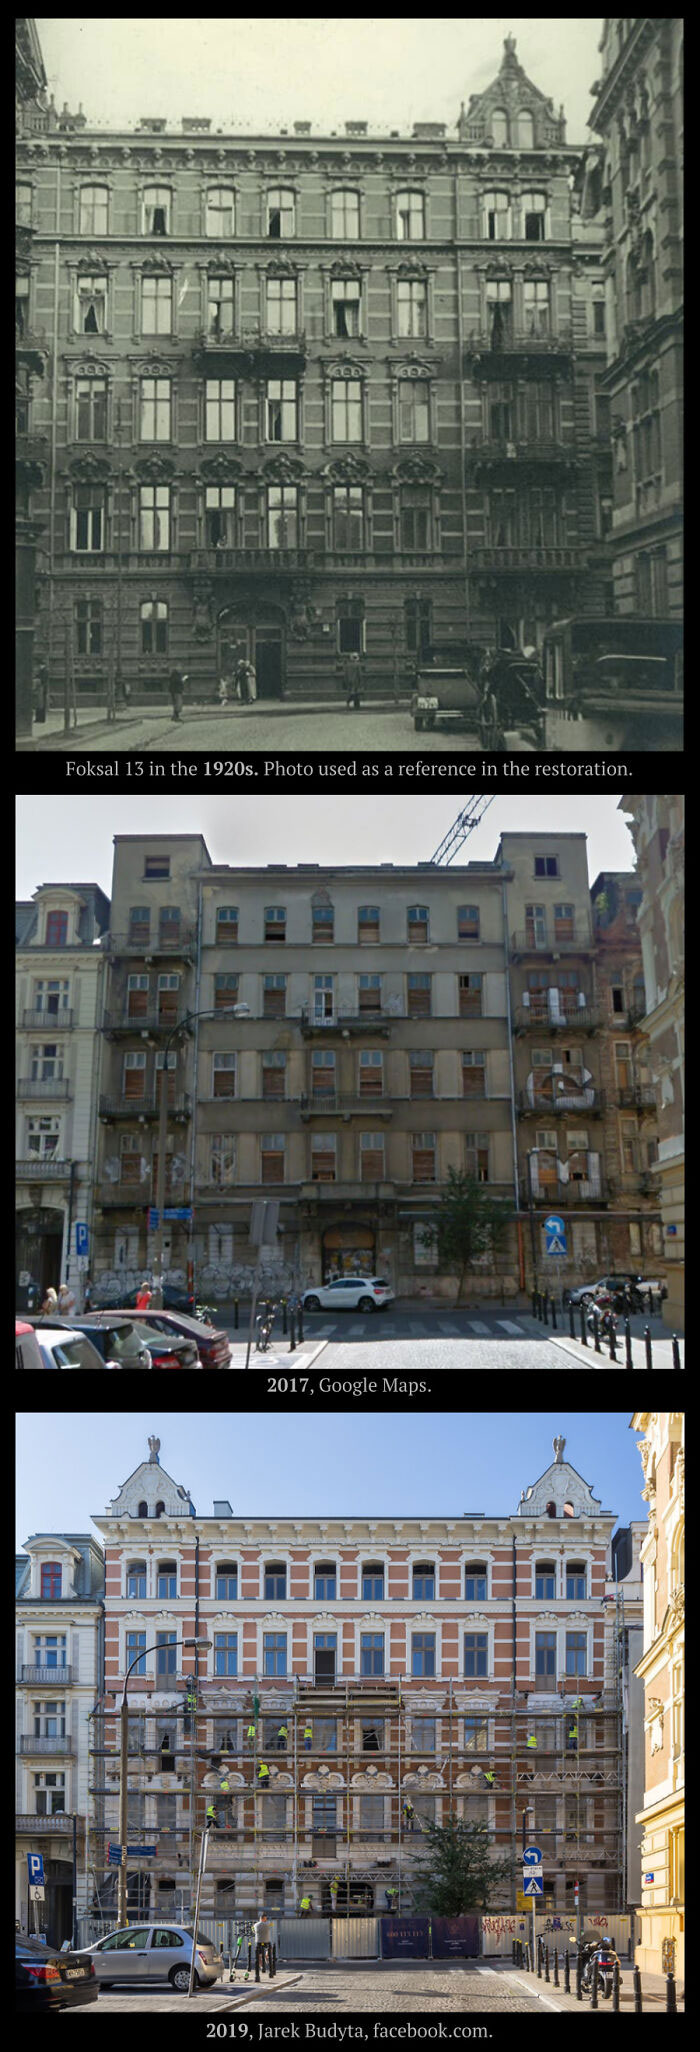 More Pictures Of The Restored Building In Poland